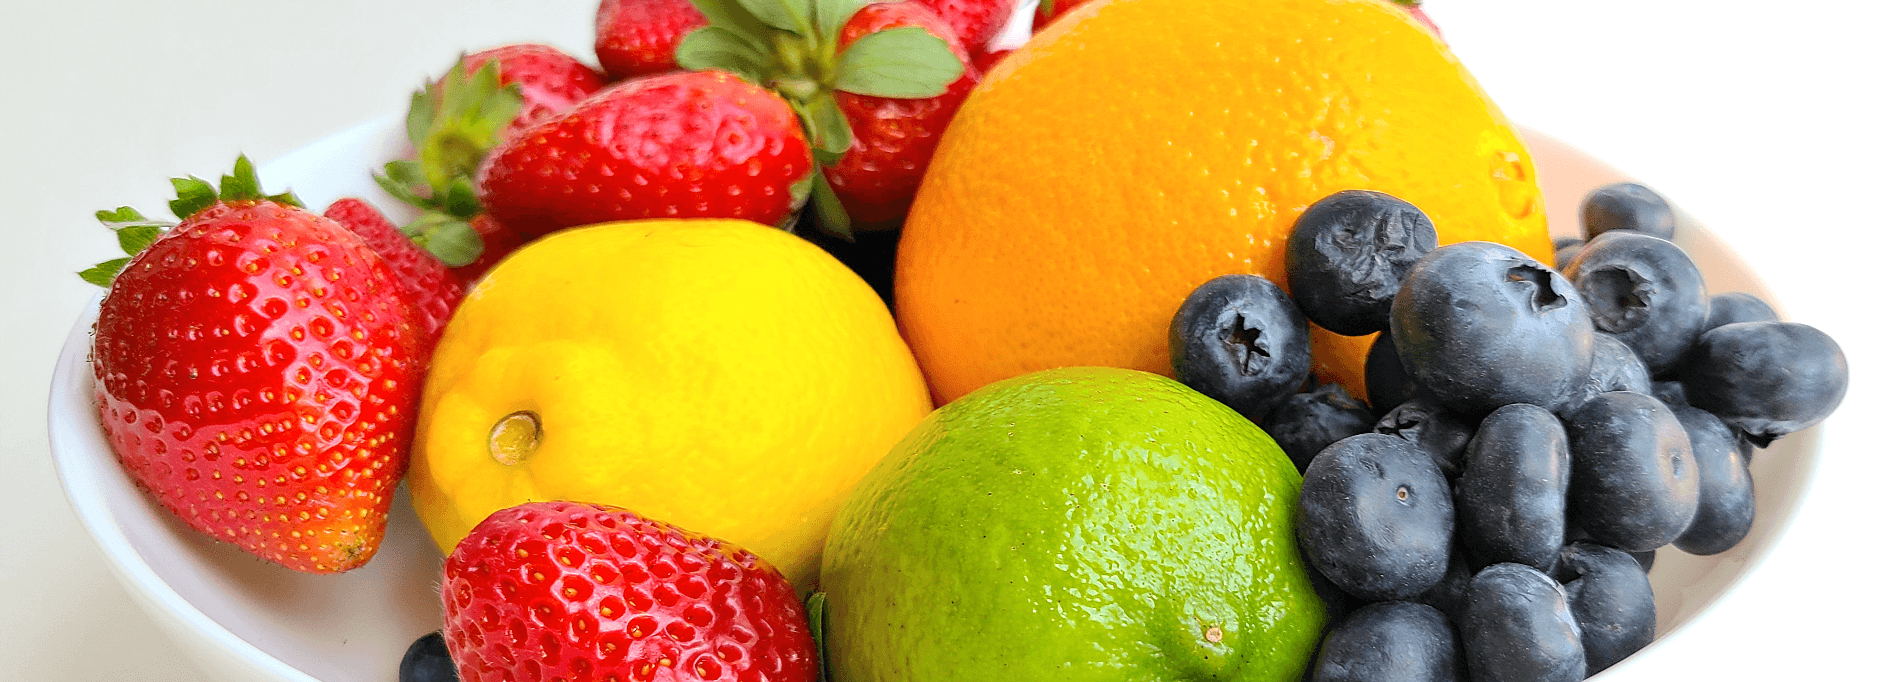 Foods That Boost The Immune System Fruit